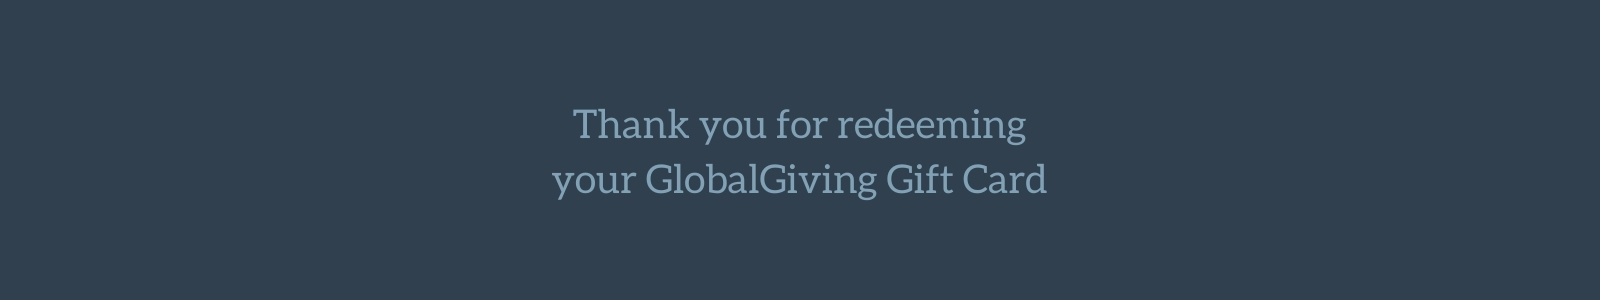 Redeem your GlobalGiving Gift Card